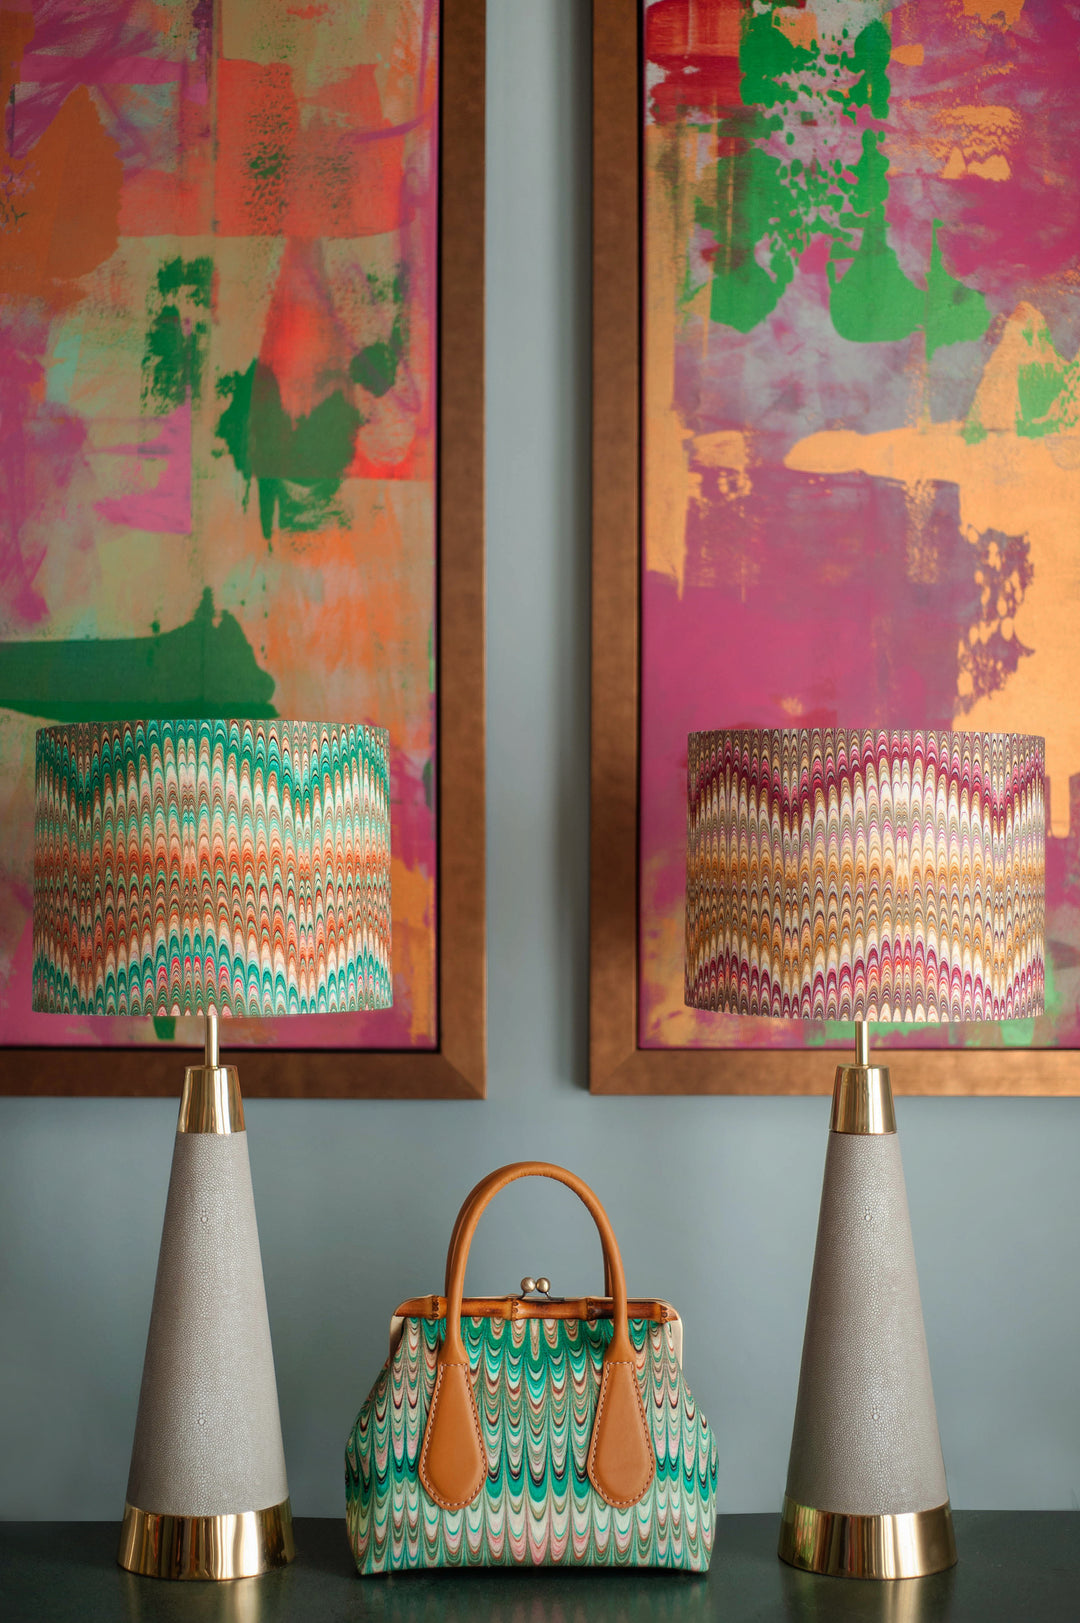 5 Ways To Incorporate Marbled Motifs Into Your Interior Design